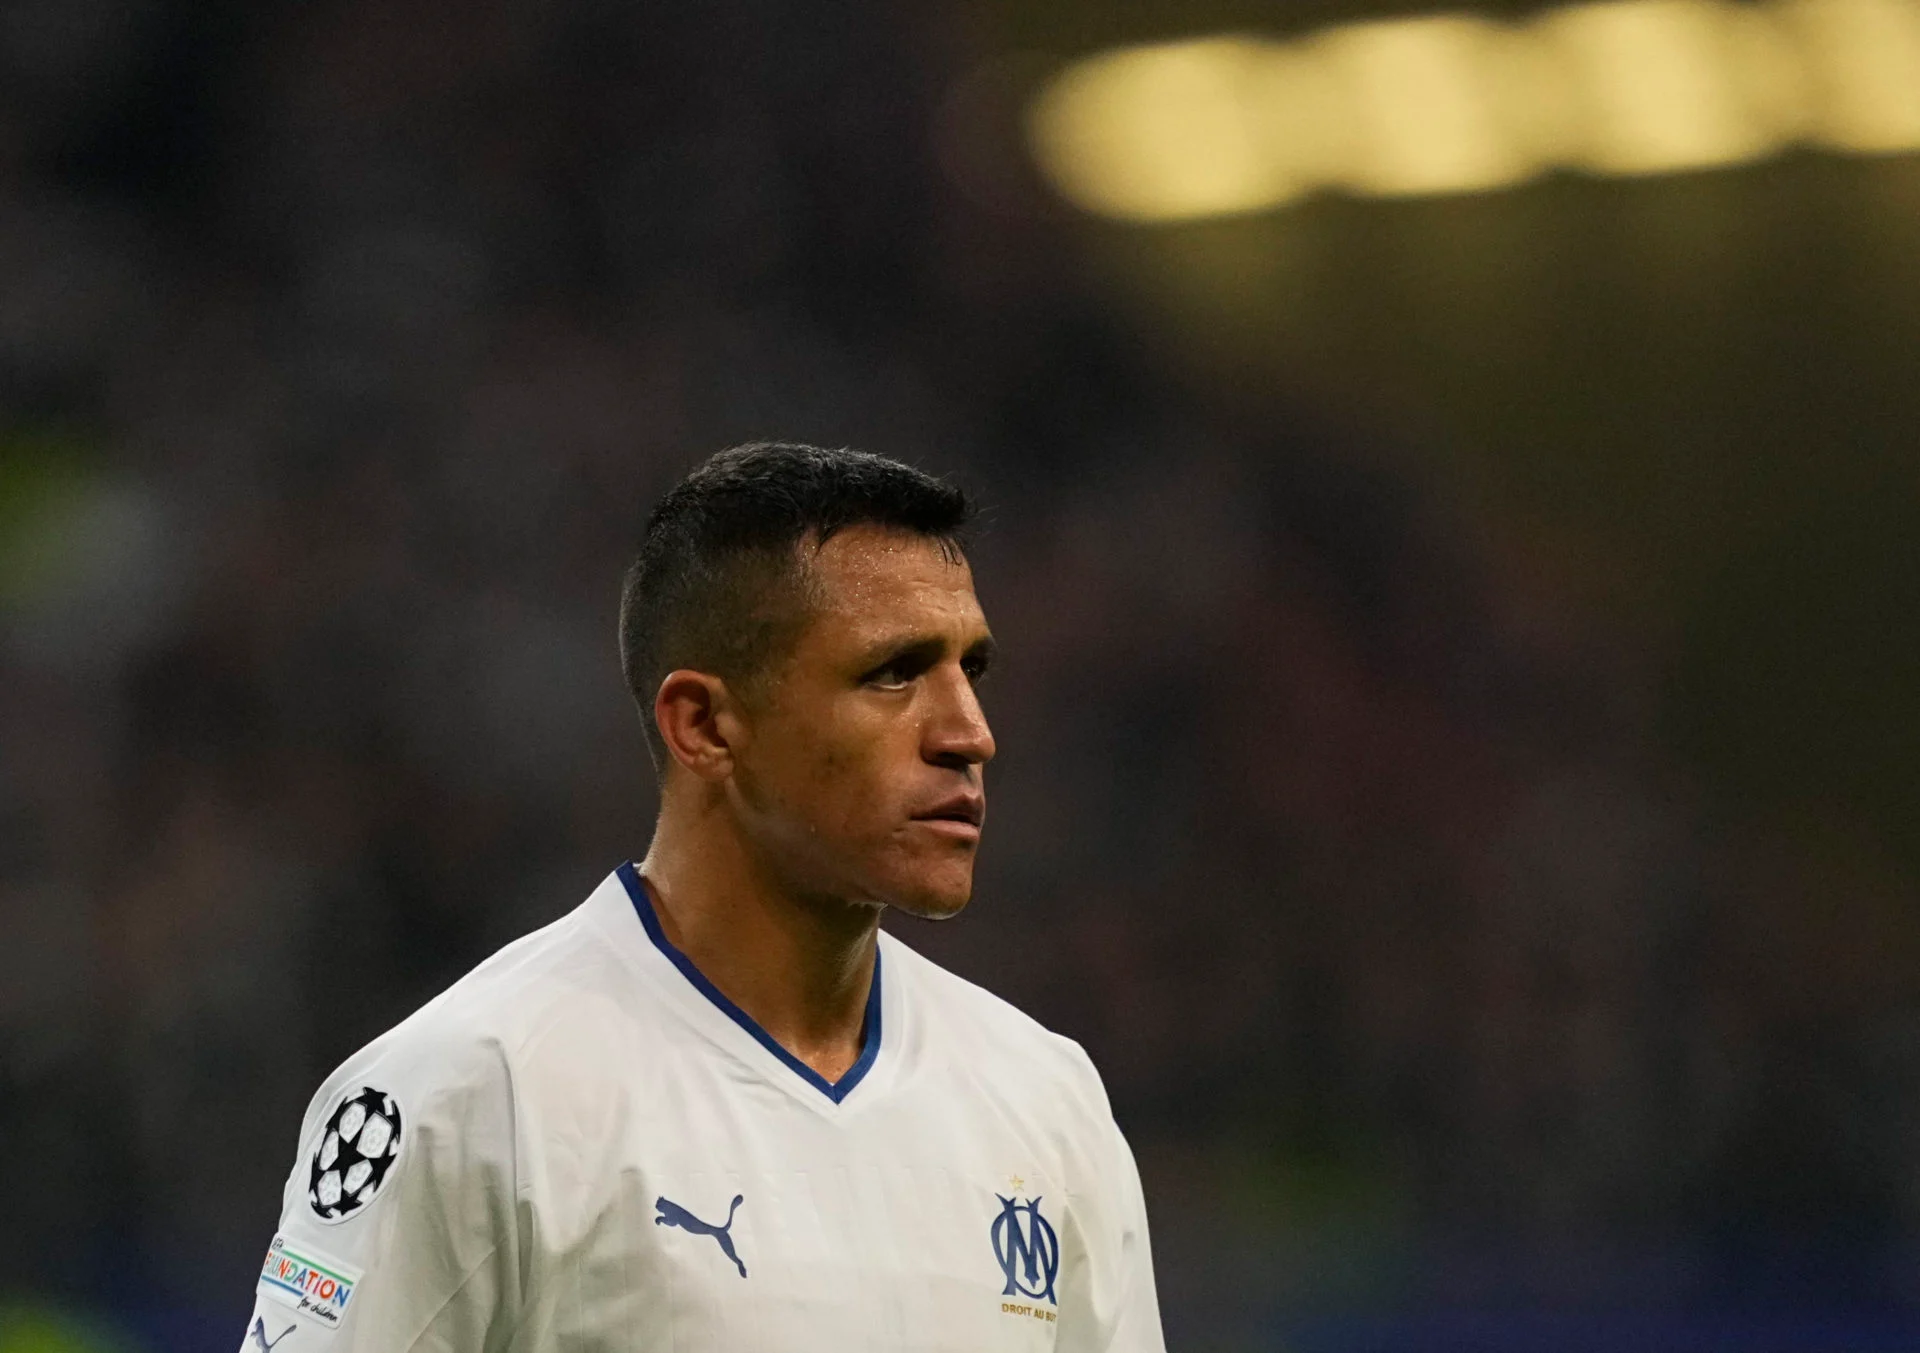 Joaquin Correa is taking the medicals ahead of his transfer to Olympique Marseille, while Alexis Sanchez has already signed his new Inter contract.